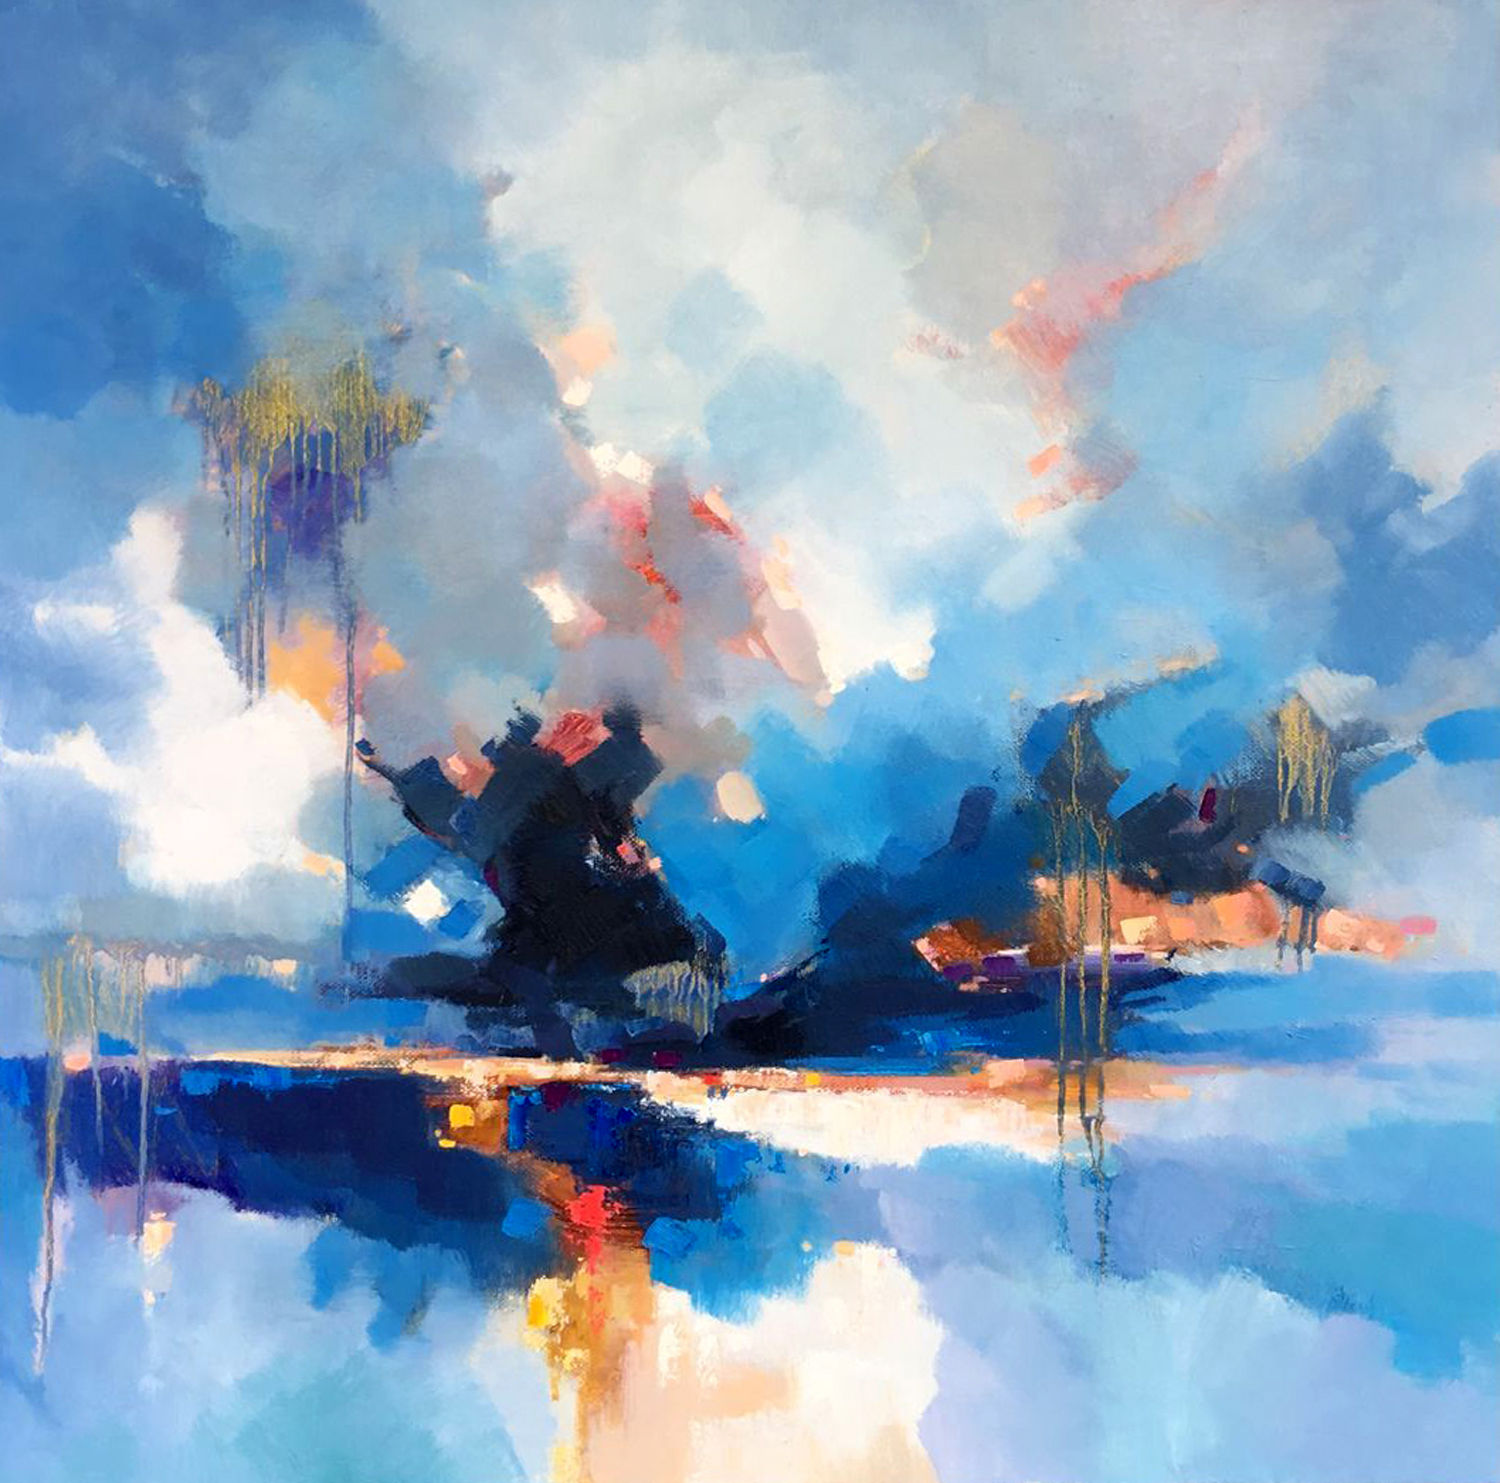 Cloudy Sky 133 By Jingshen You 17 Painting The Artling